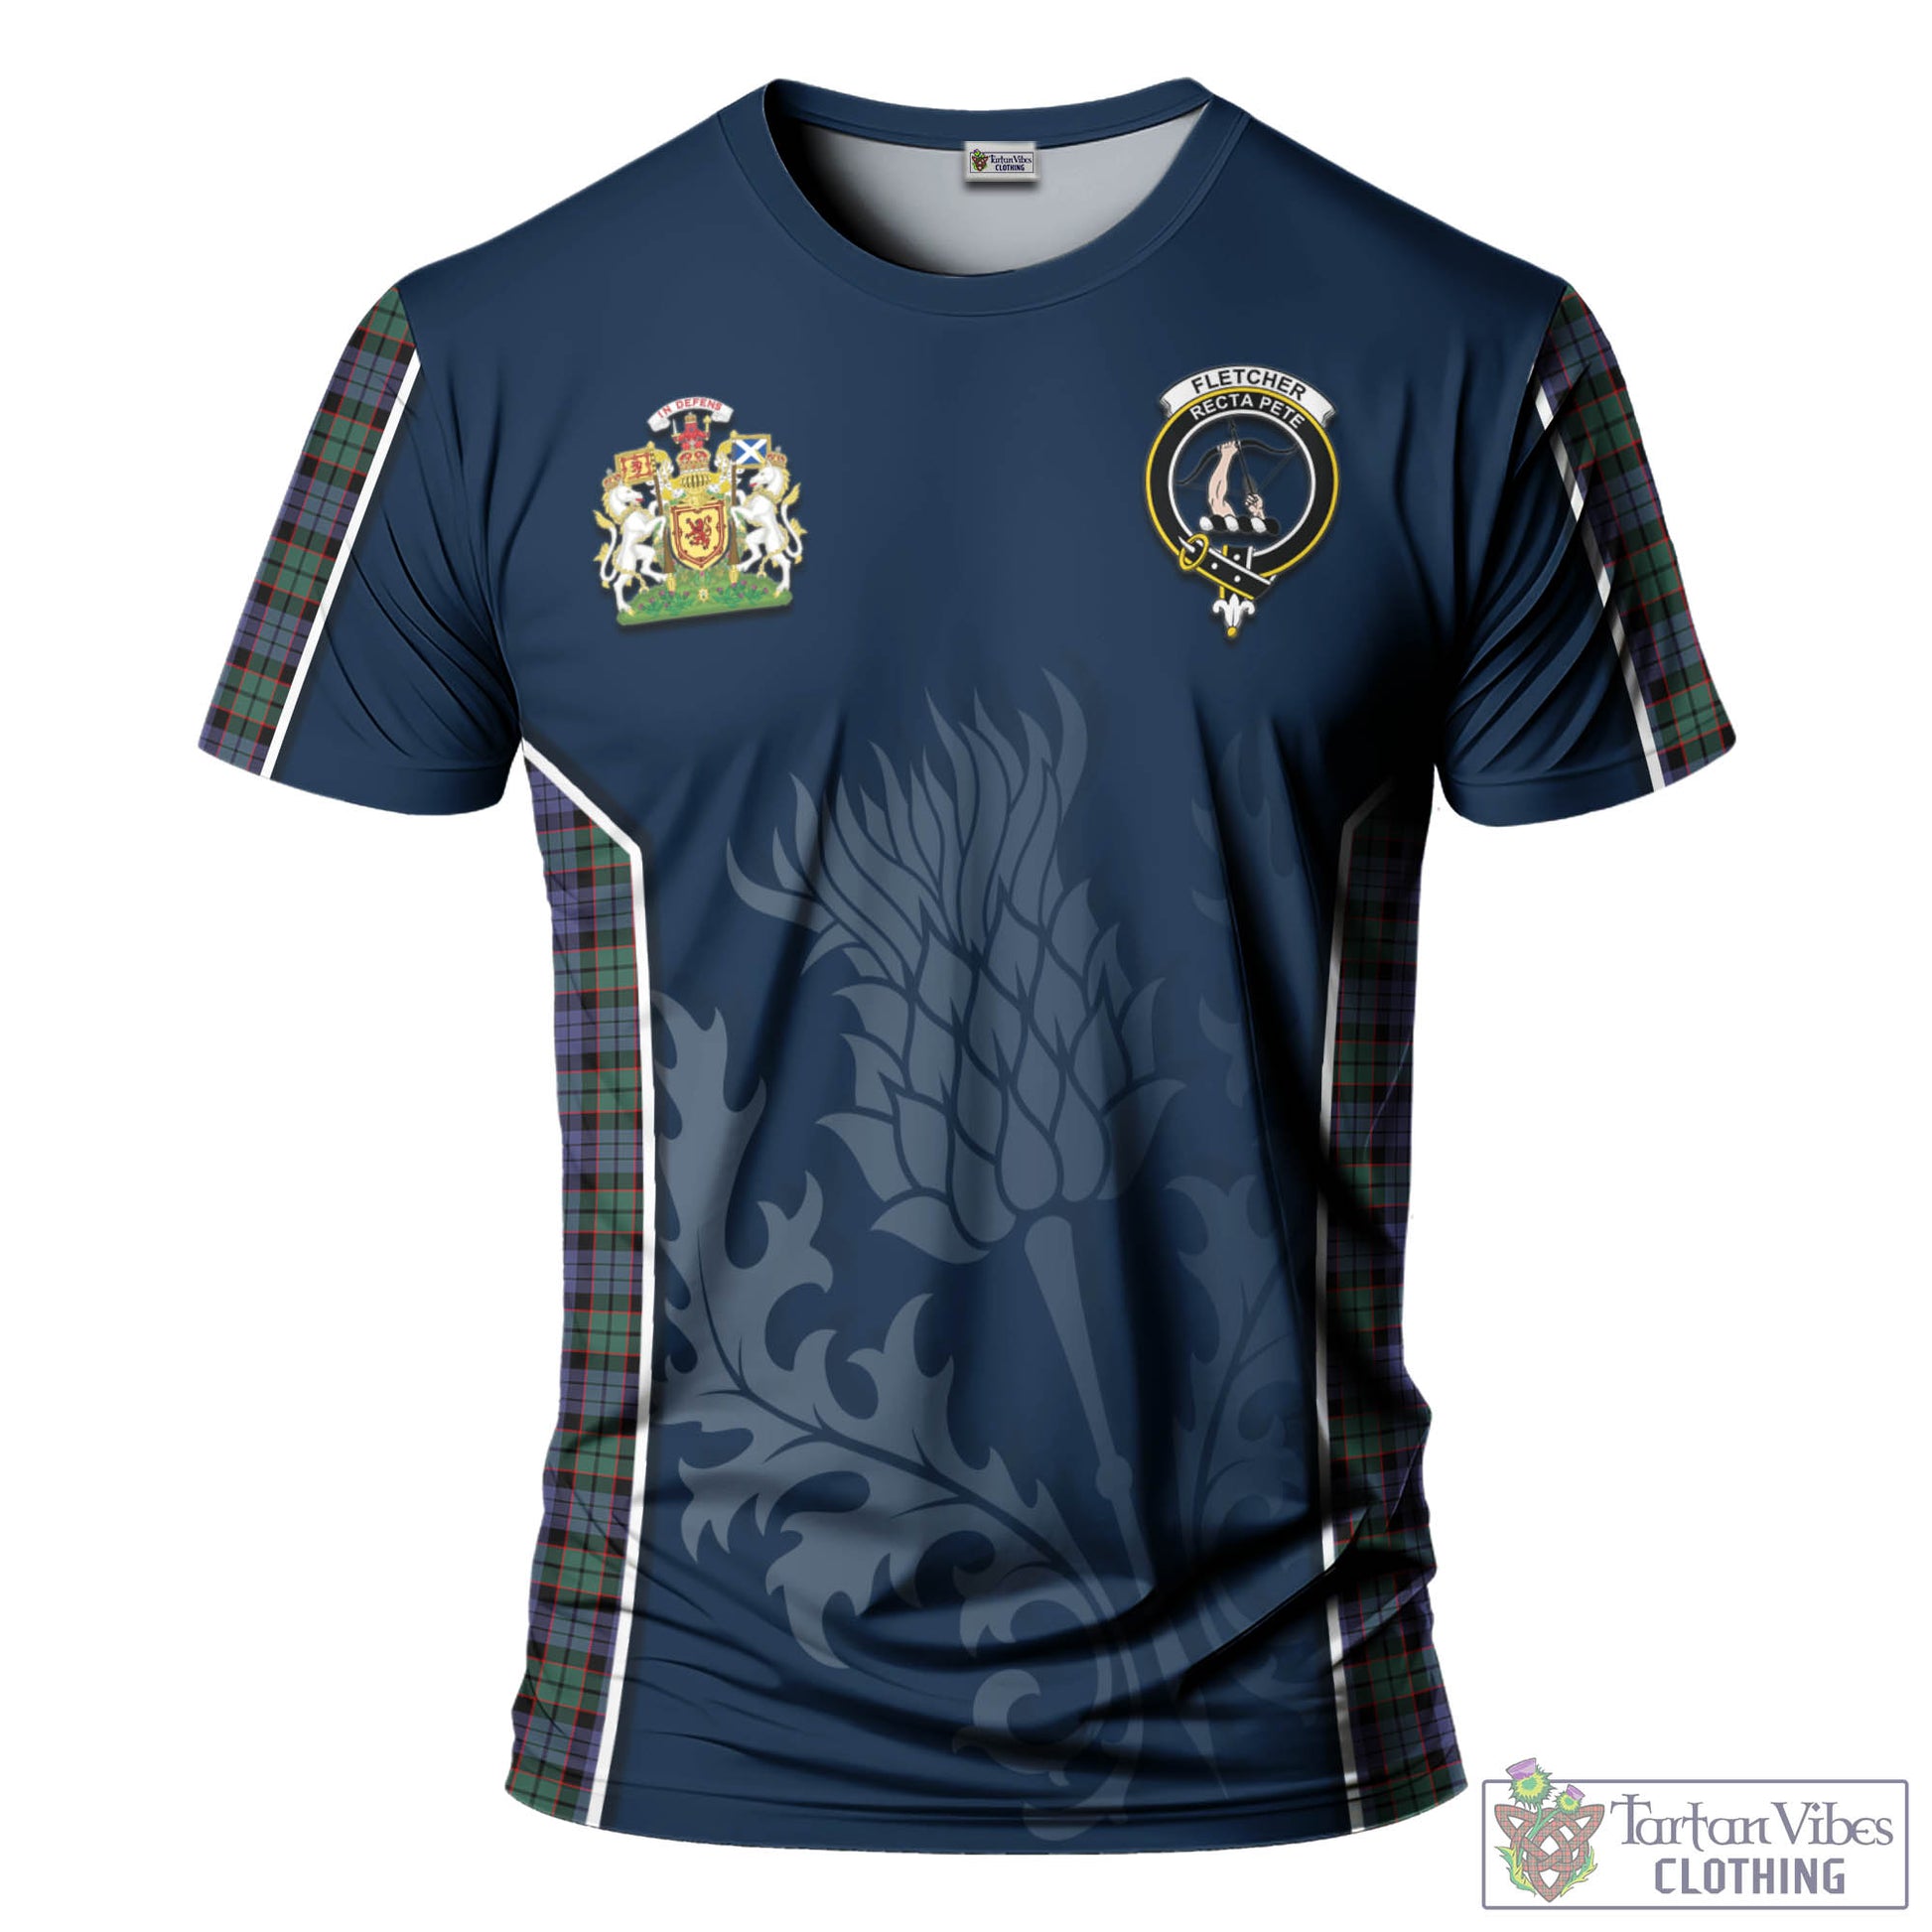 Tartan Vibes Clothing Fletcher Modern Tartan T-Shirt with Family Crest and Scottish Thistle Vibes Sport Style